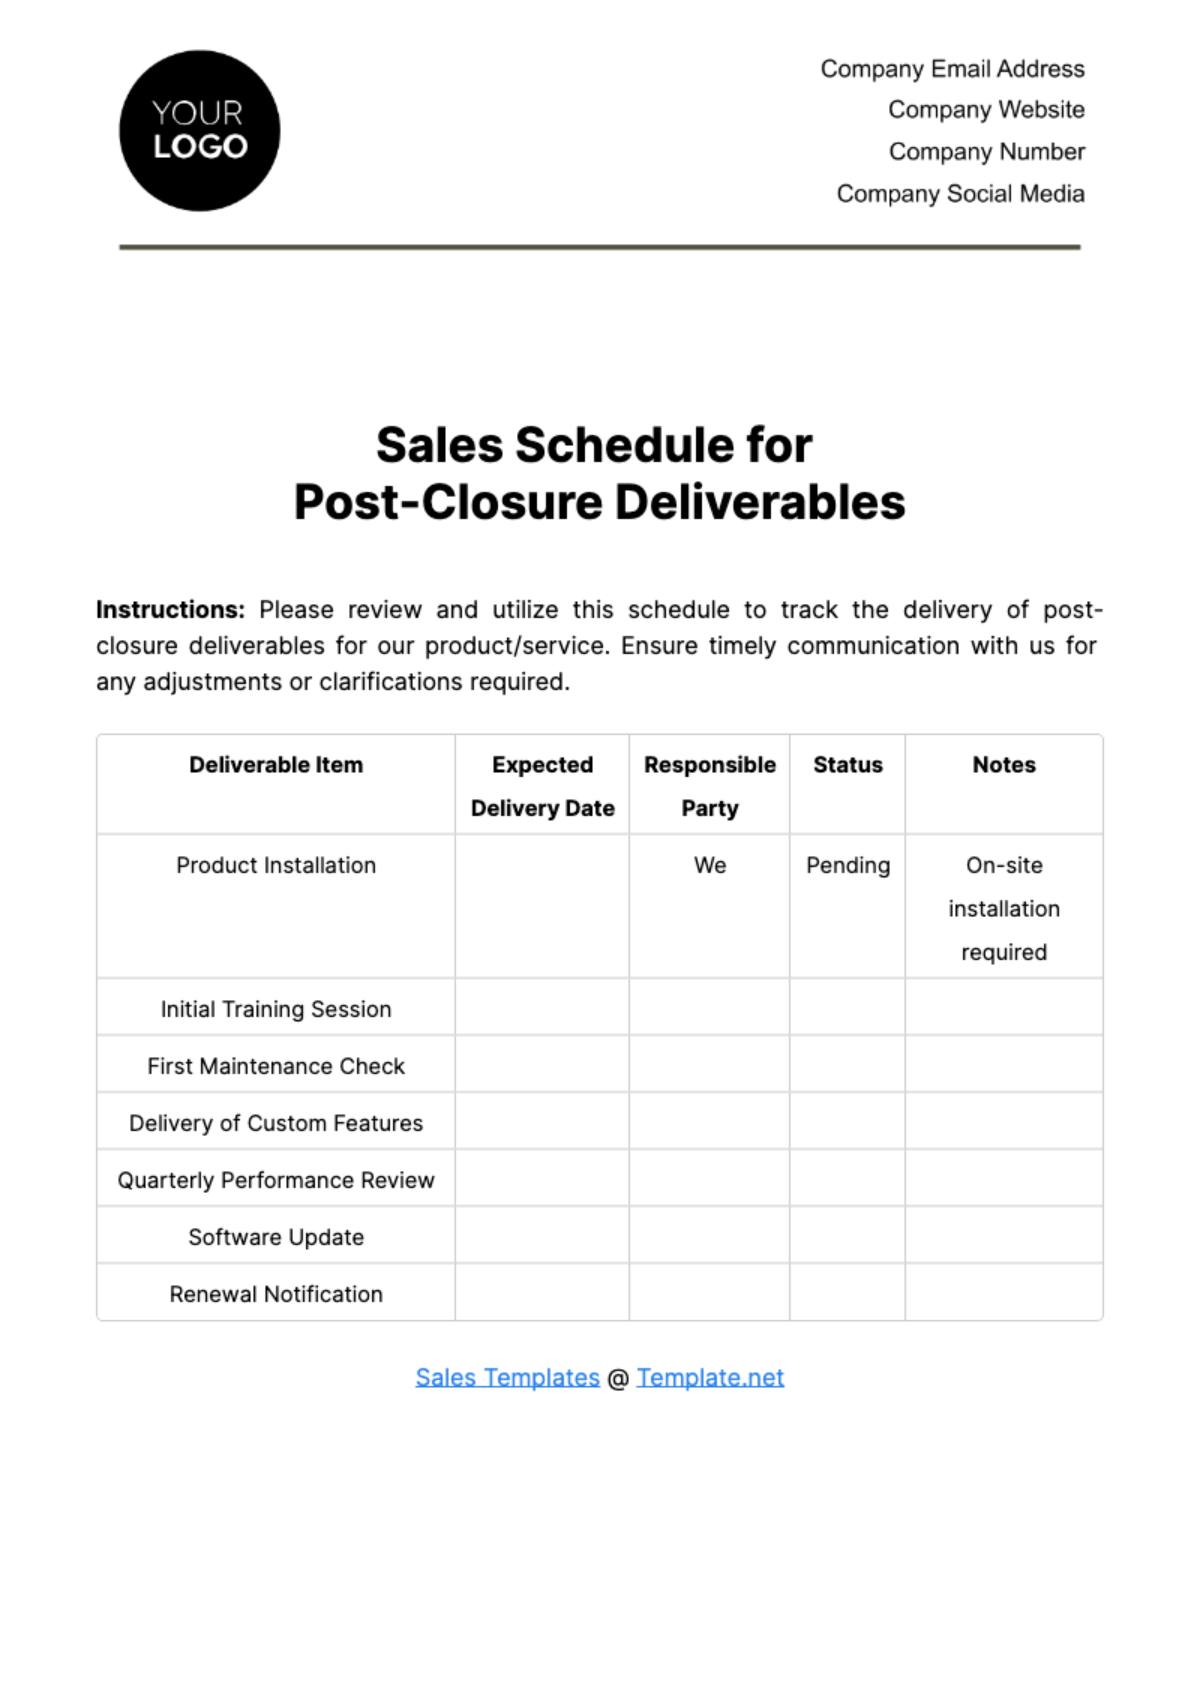 Sales Schedule for Post-Closure Deliverables Template